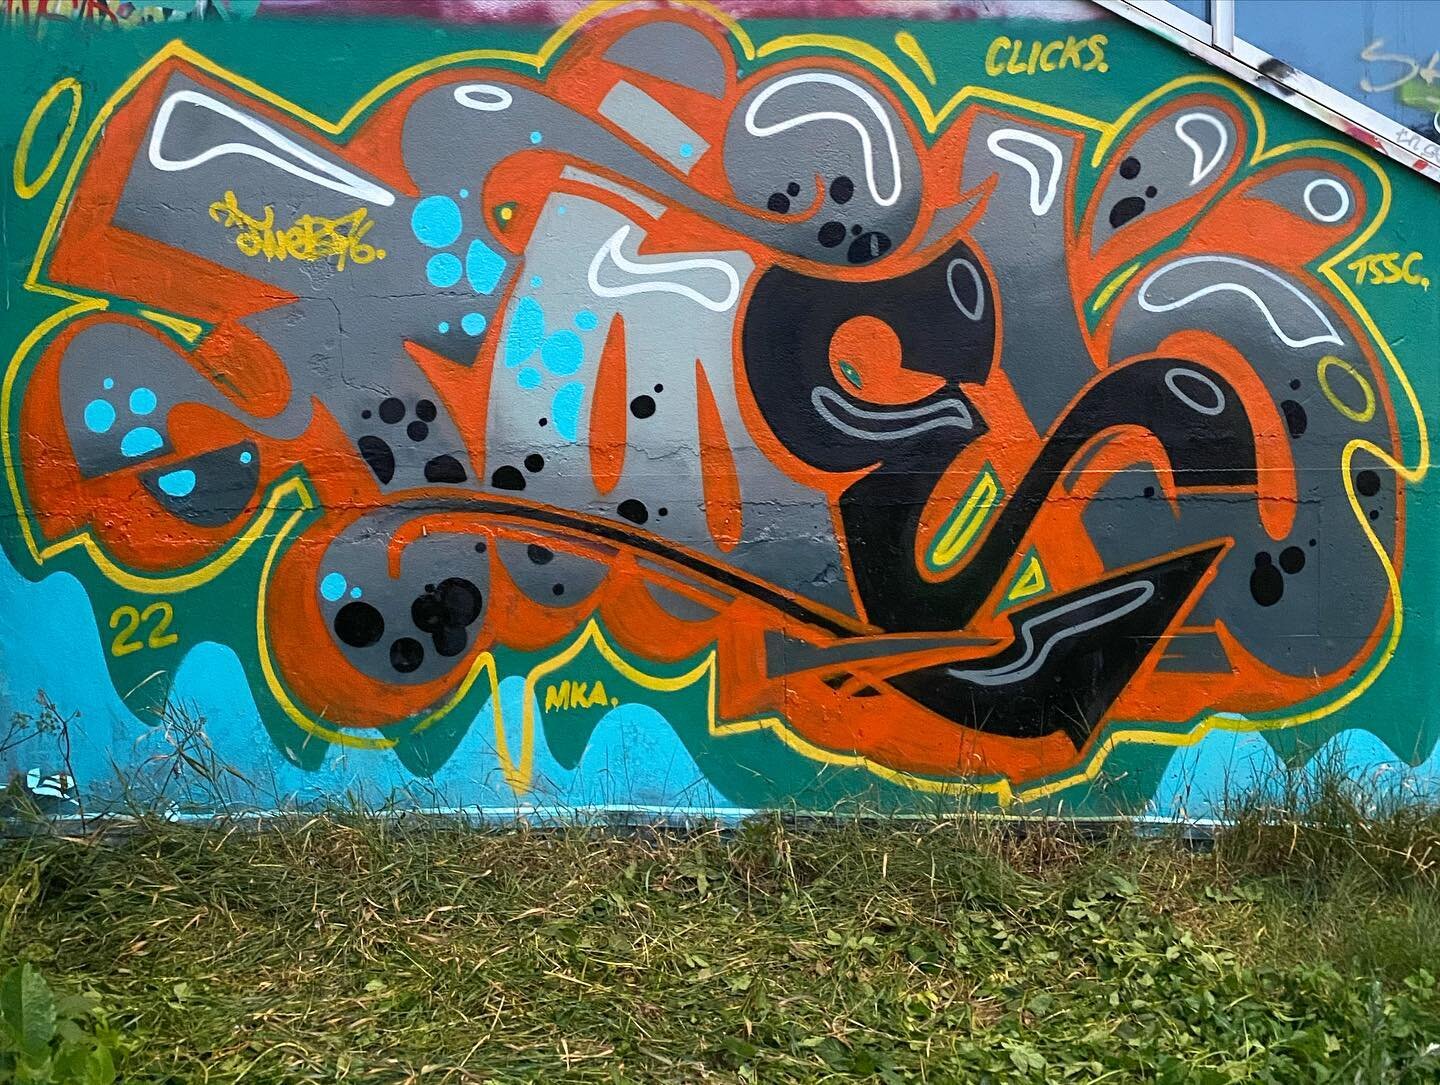 Quick and dirty freestyle &hellip;
.
.

#Tweb76 #thesouthsidecrew #clickfamily #graffiti #2022 #norway #hiphop #dontstop #keepingitup